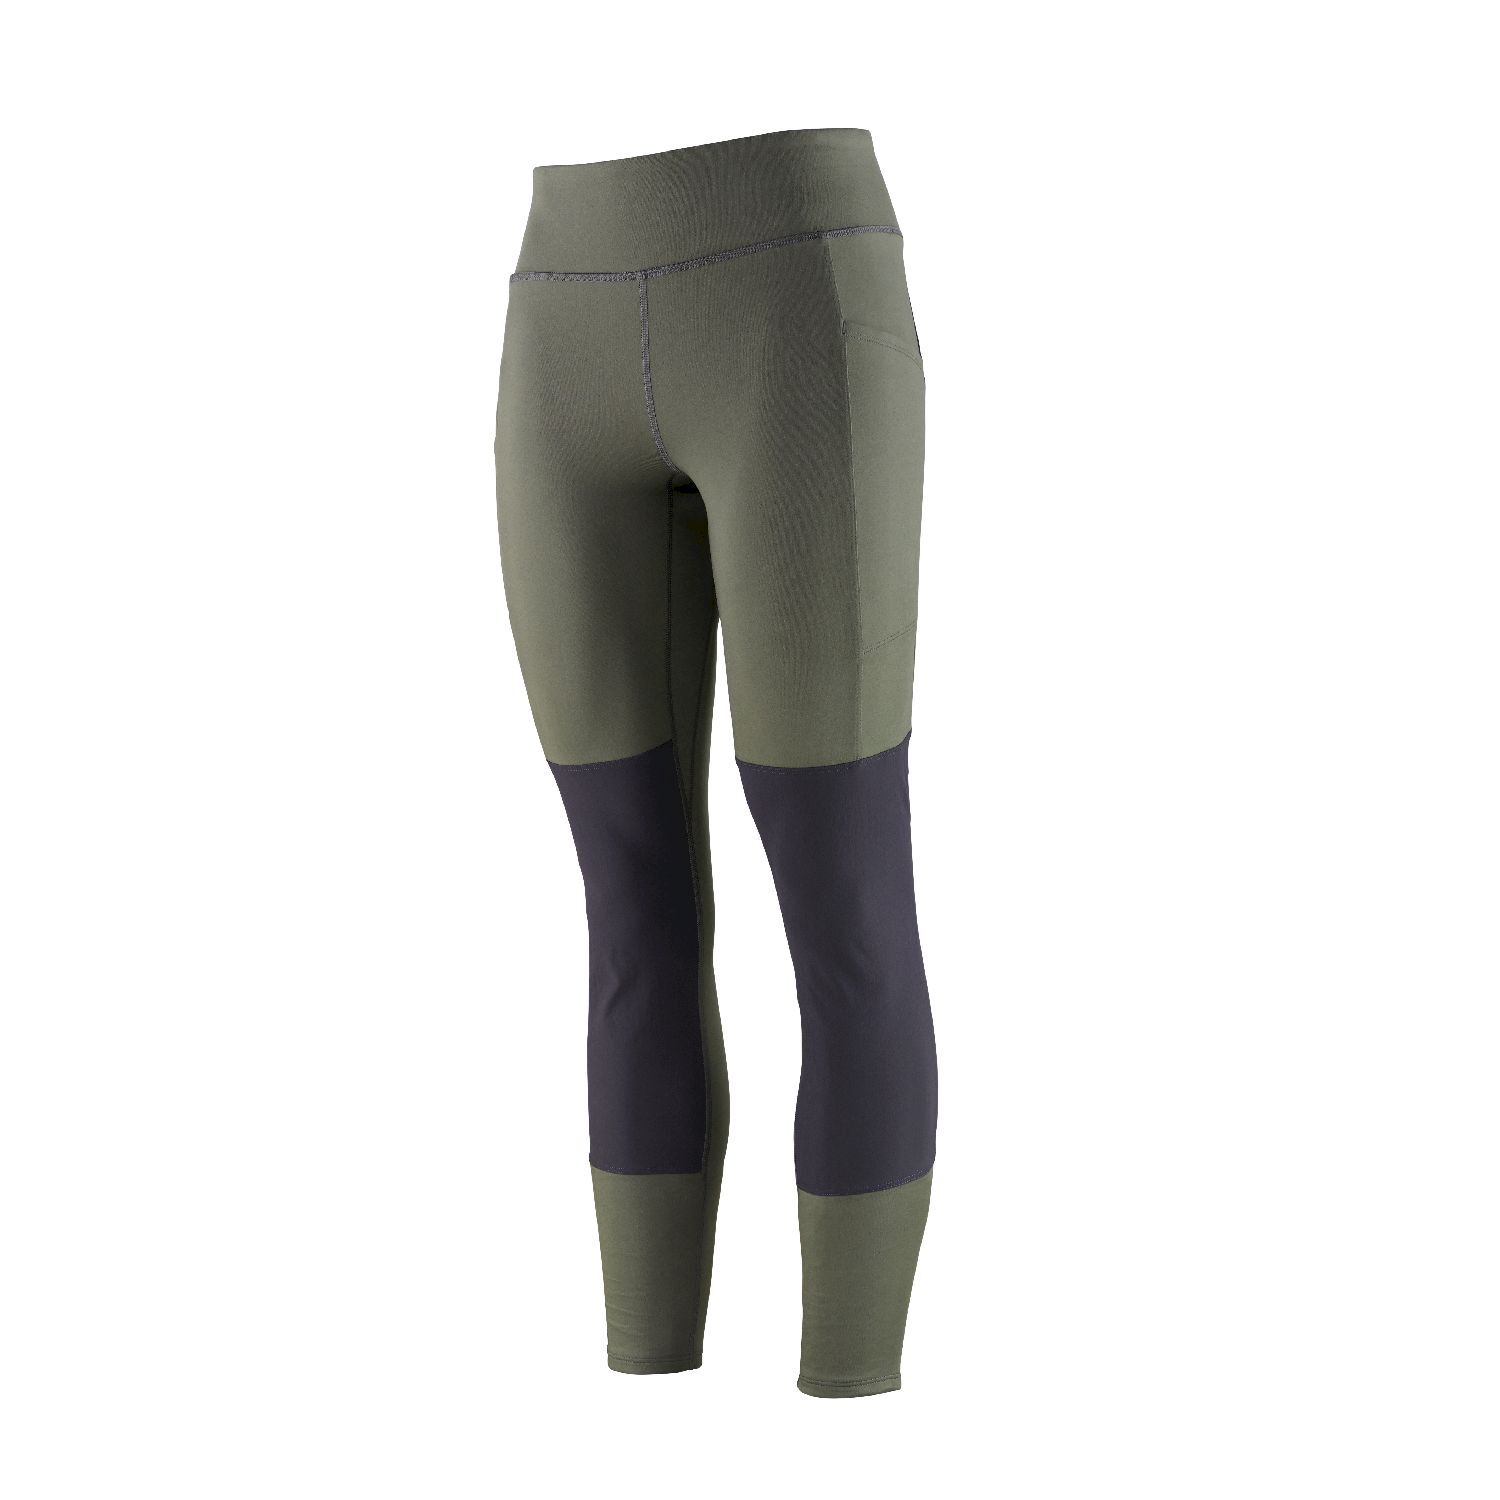 Patagonia Pack Out Hike Tights - Dámské Horolezecké kalhoty | Hardloop